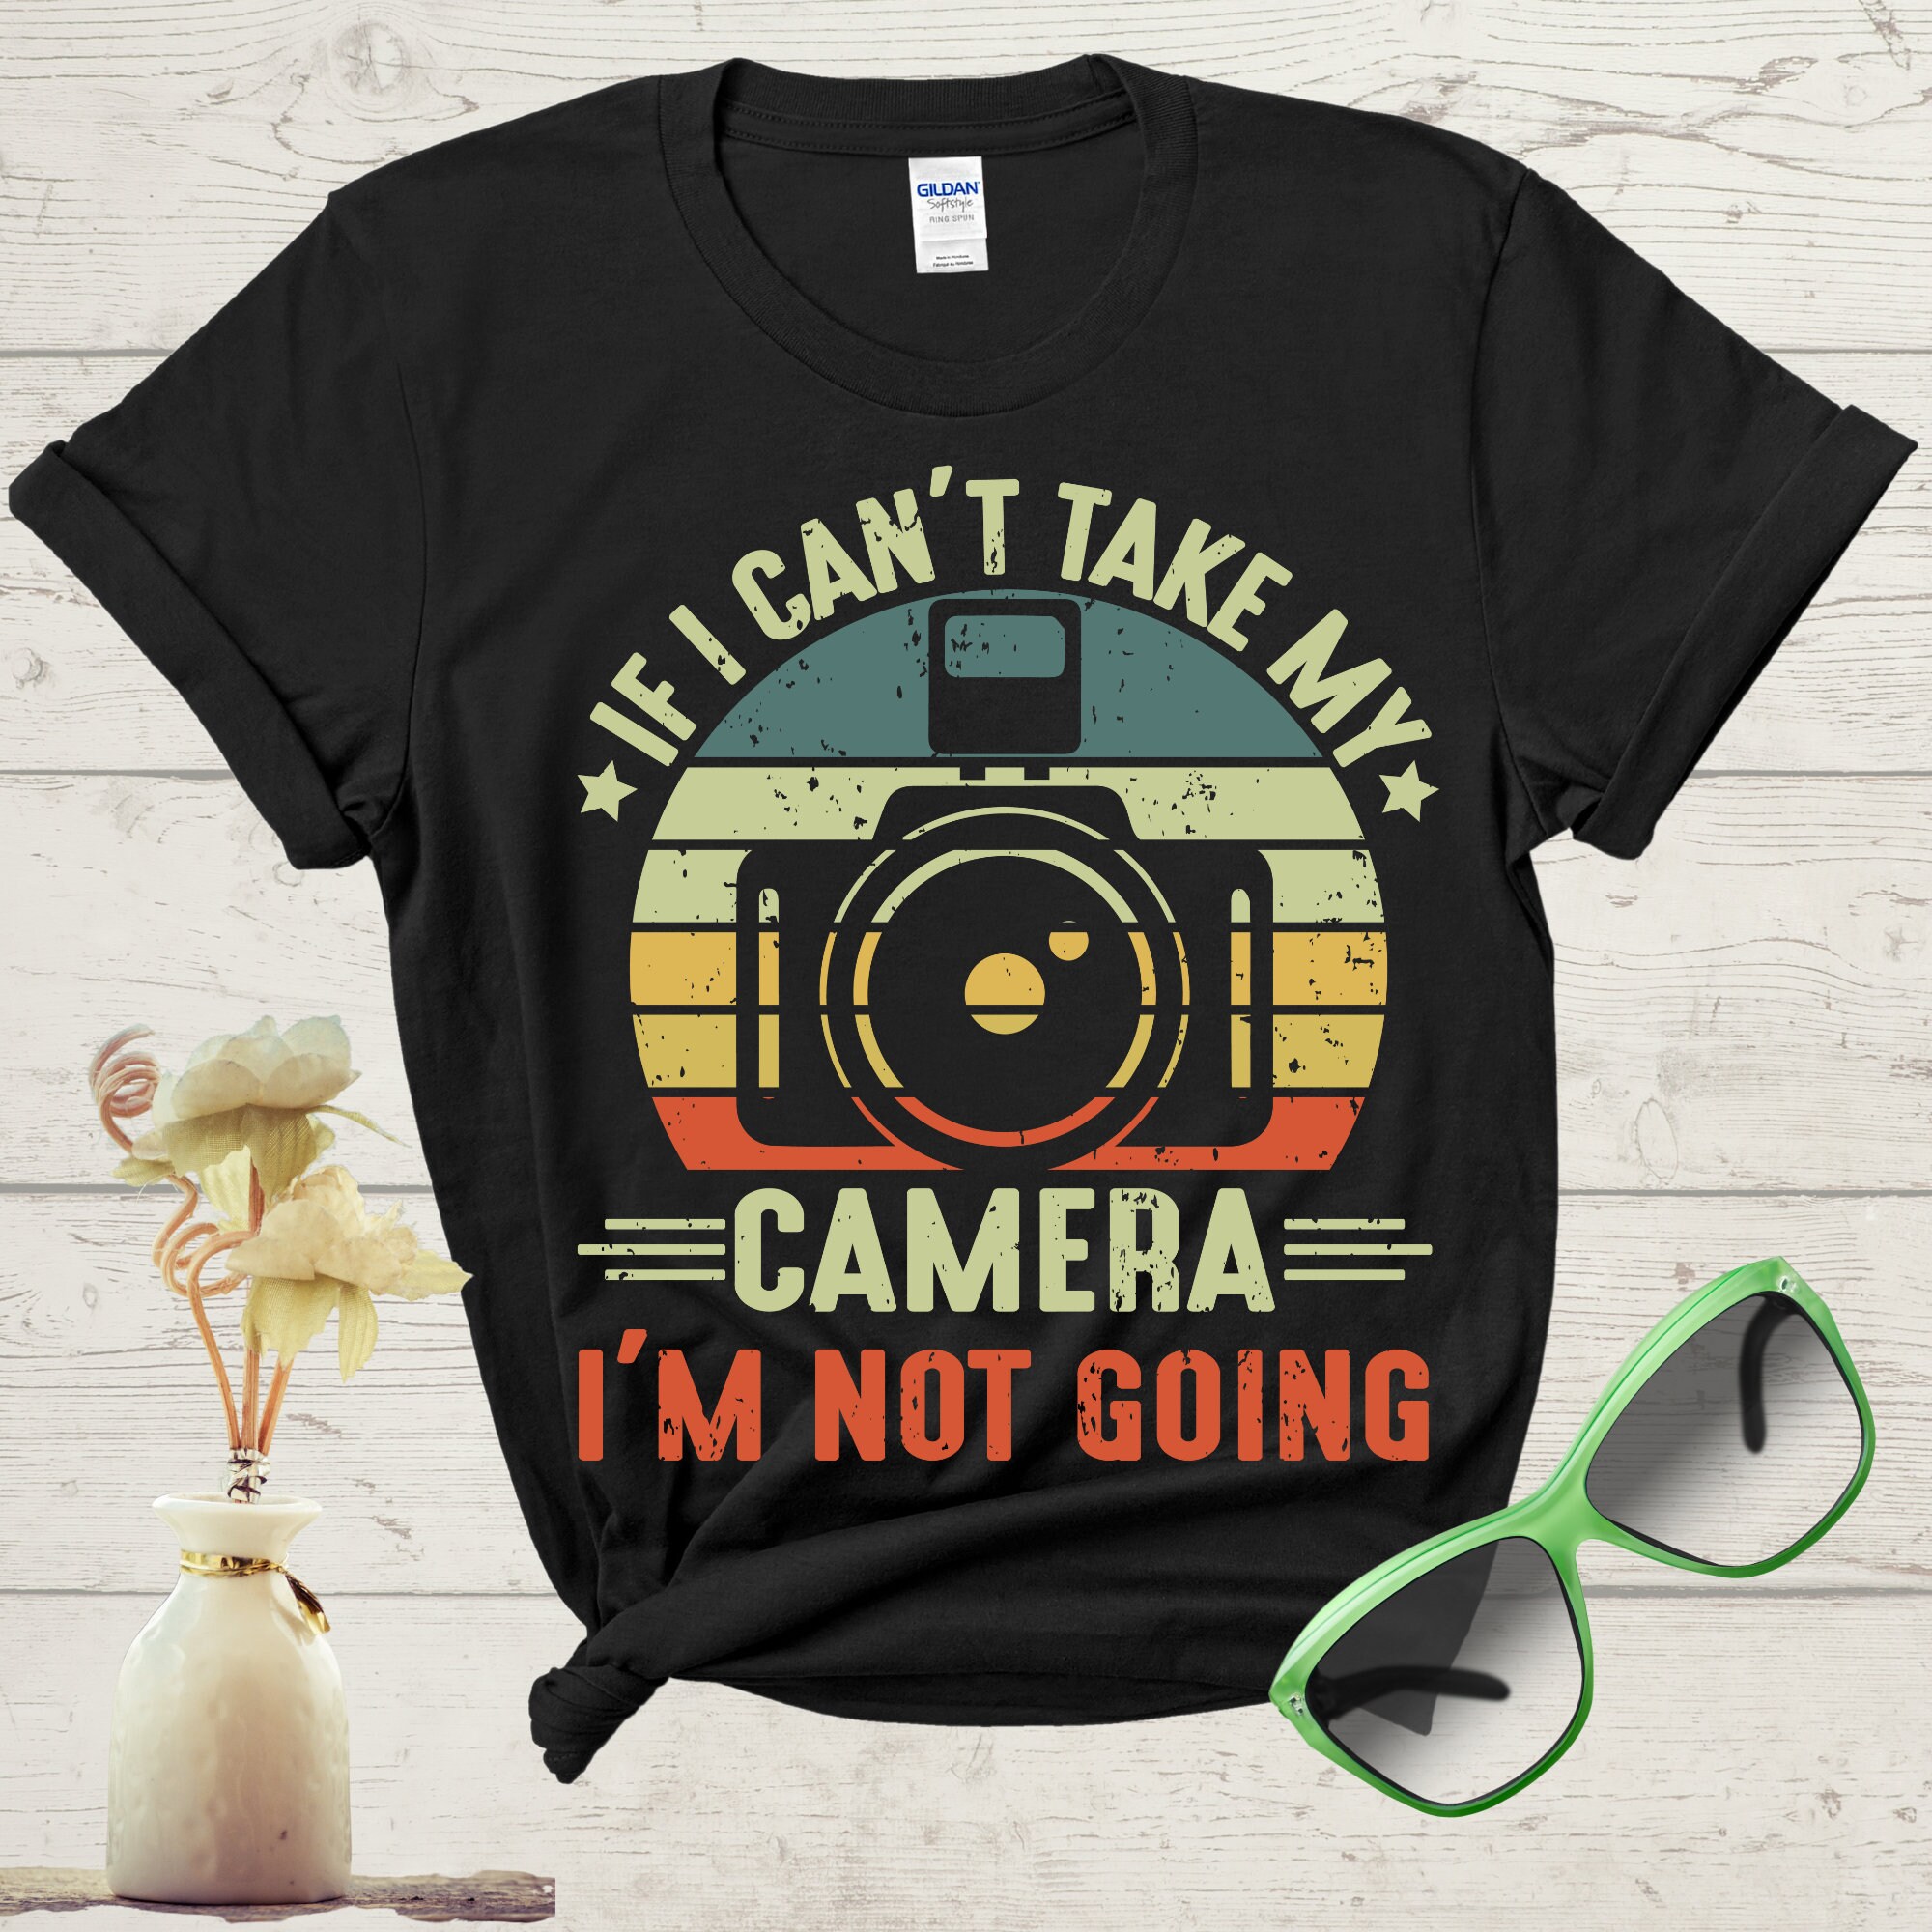 If I Can't Take My Camera I'm Not Going Photographer Focus T-shirt, Funny  Photography Shirts and Clothing, Photography Apparel 